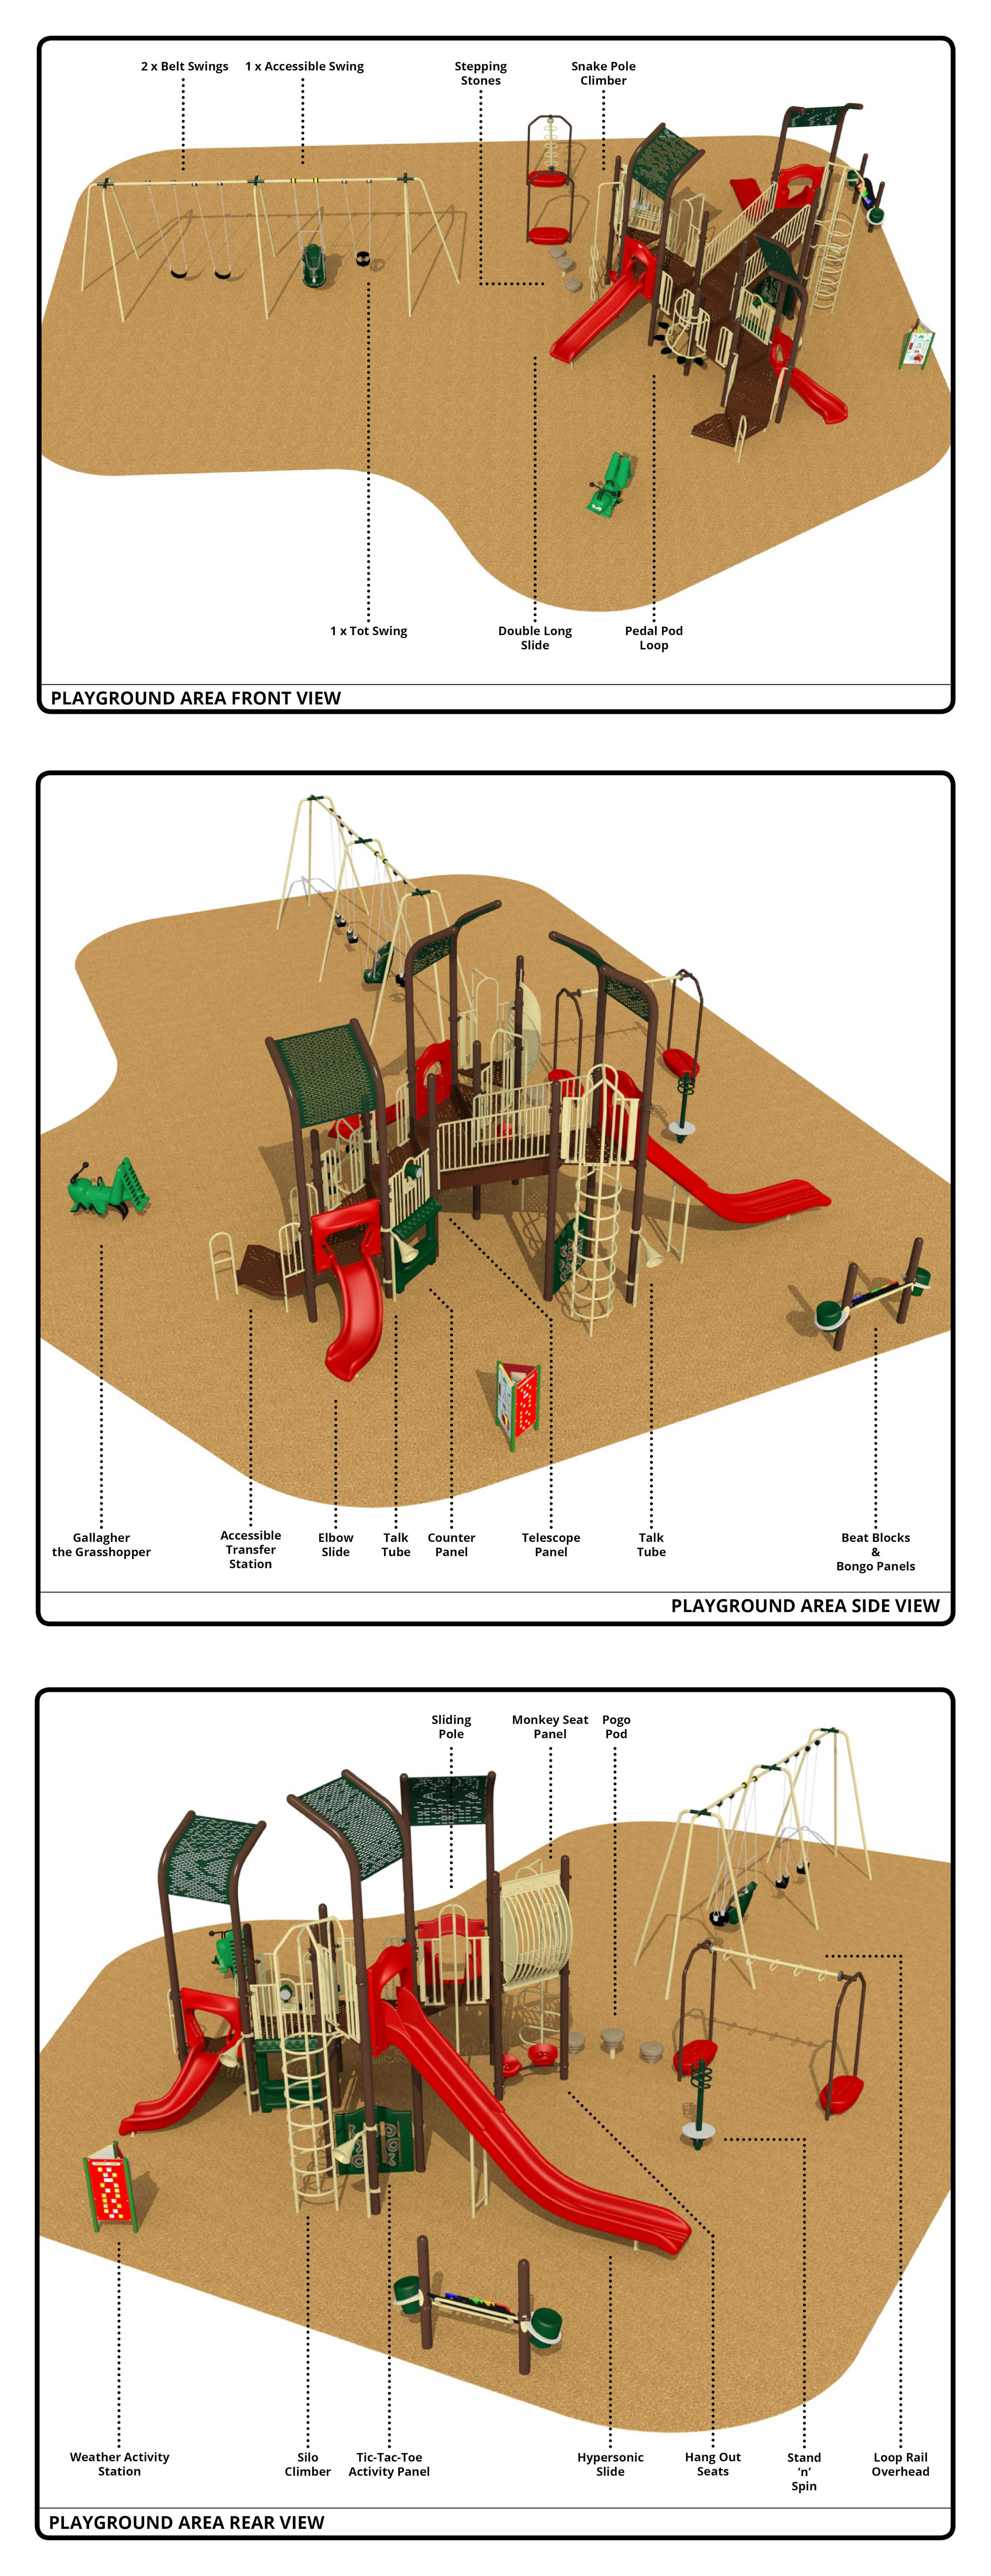 Playground Features